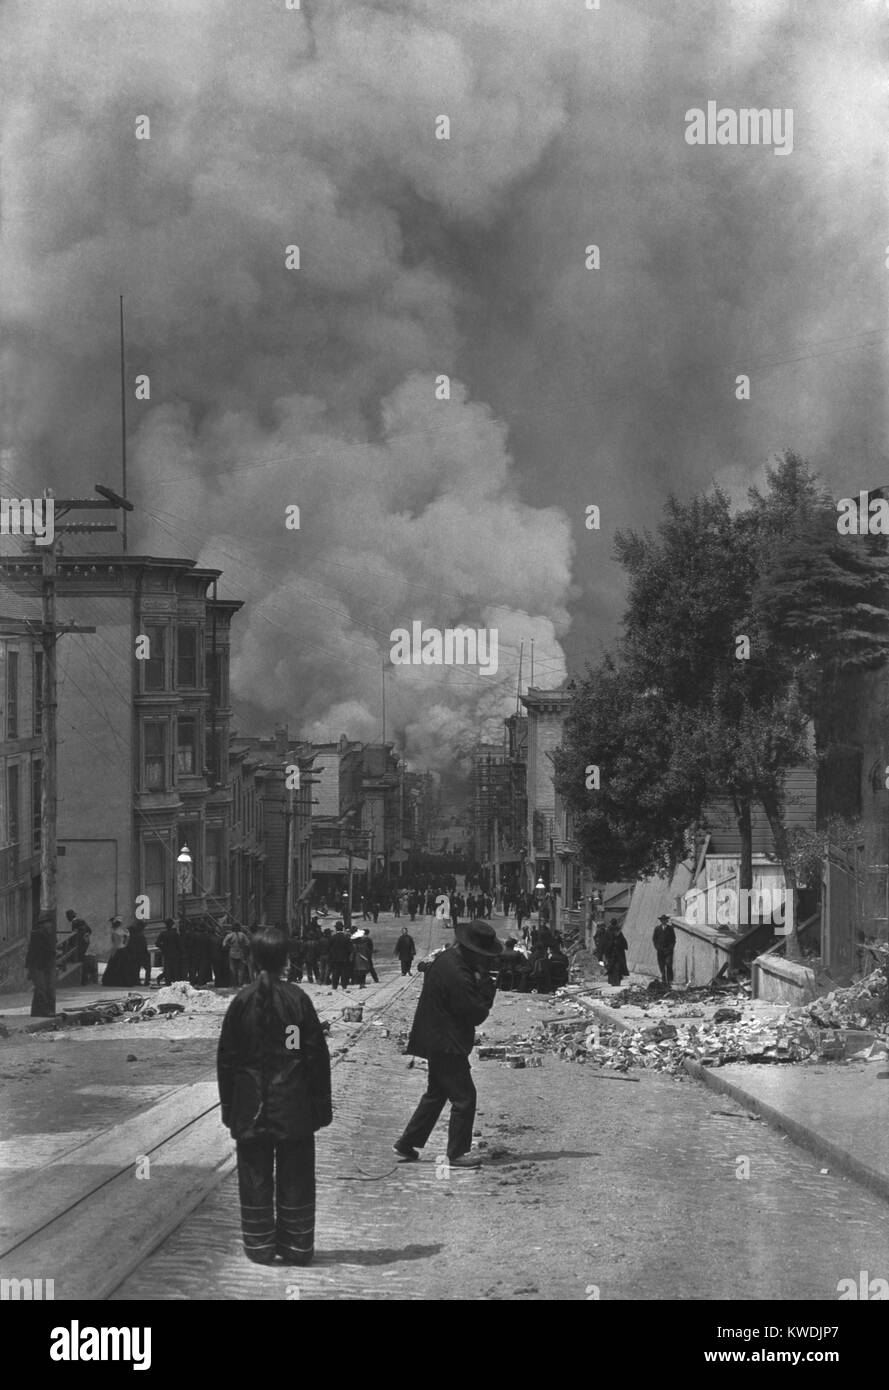 Chinese residents of San Francisco watching the fire following the earthquake of April 18, 1906. In the distance are crowds of people moving away from the fire zone. Photo by Arnold Genthe (BSLOC 2017 17 19) Stock Photo